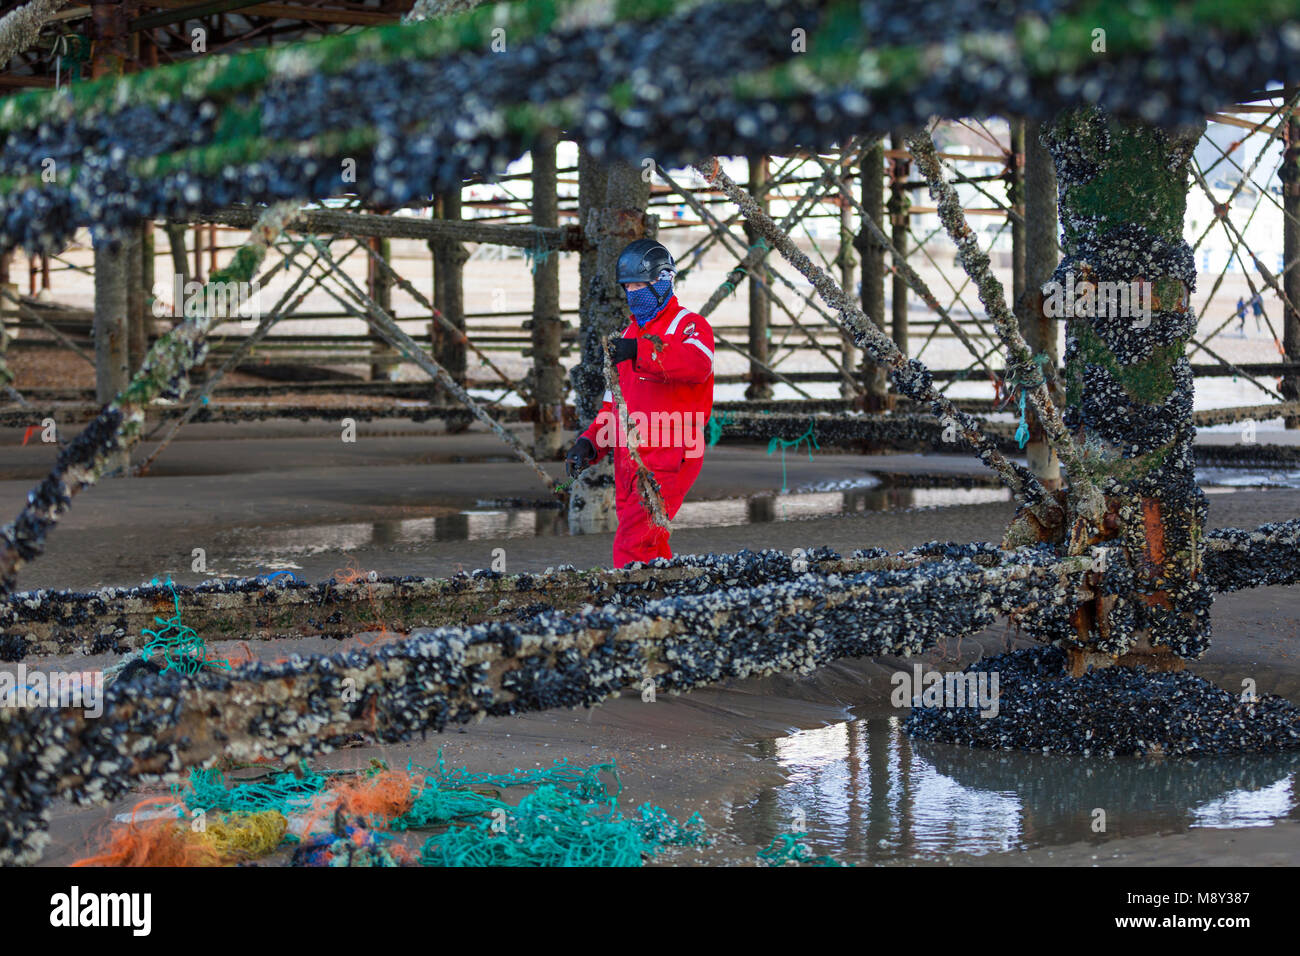 Environmental pollution of the hastings pier, a man is seen climbing the pillars of the pier in order to clean all traces of rope and plastics, uk Stock Photo